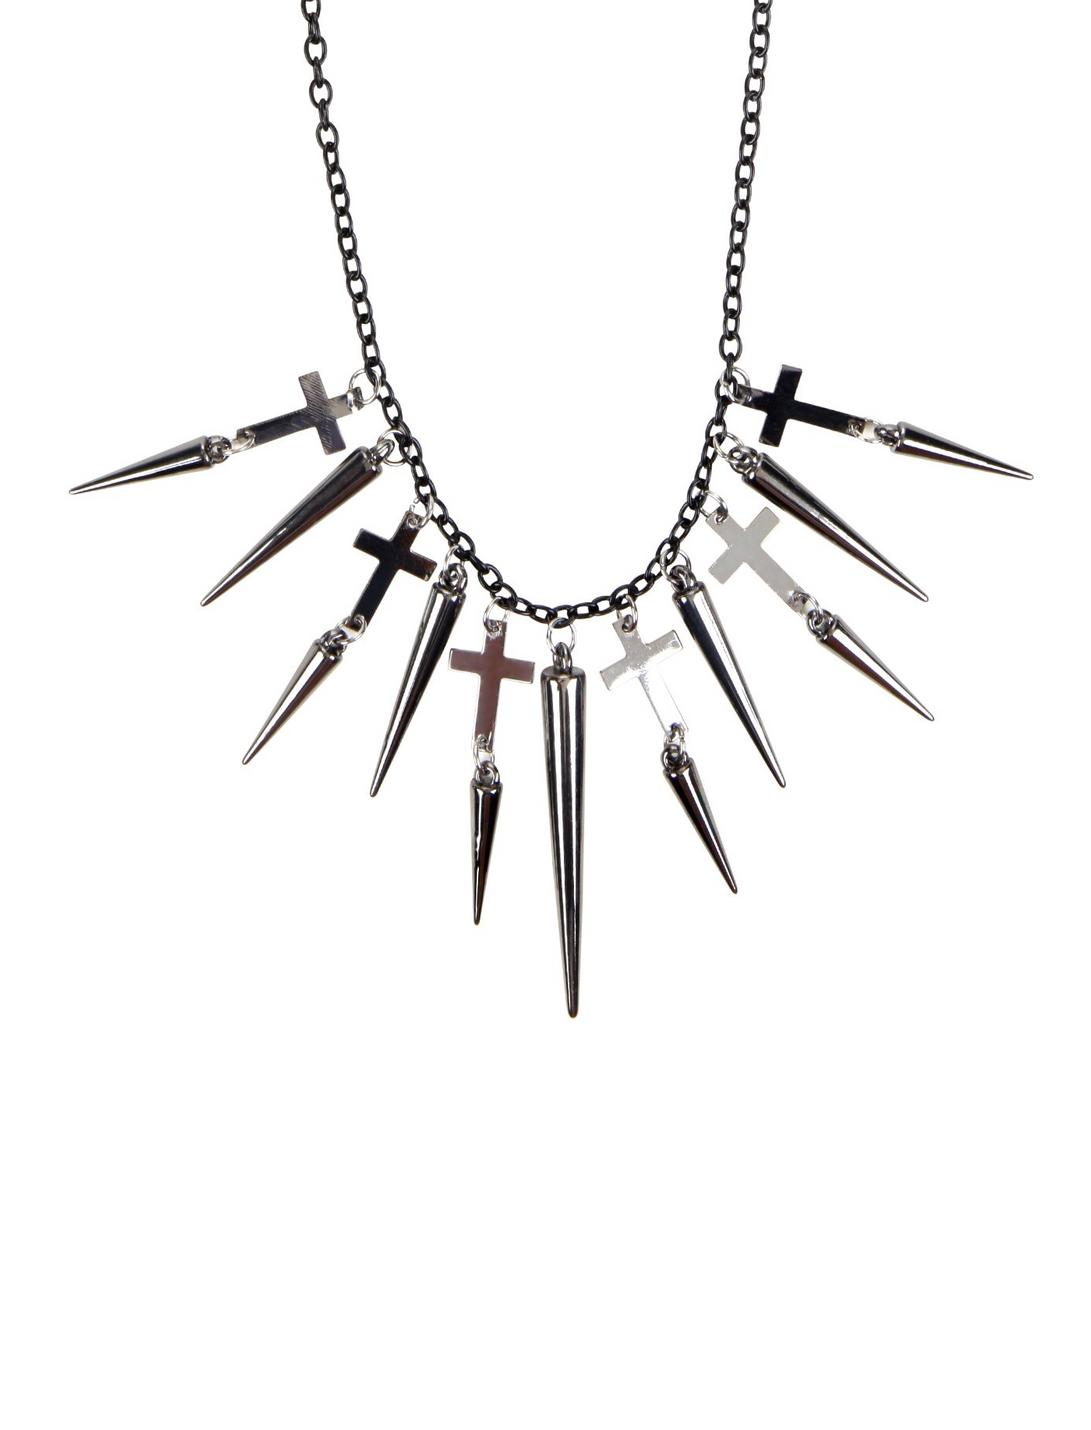 Cross & Spikes Necklace, , hi-res